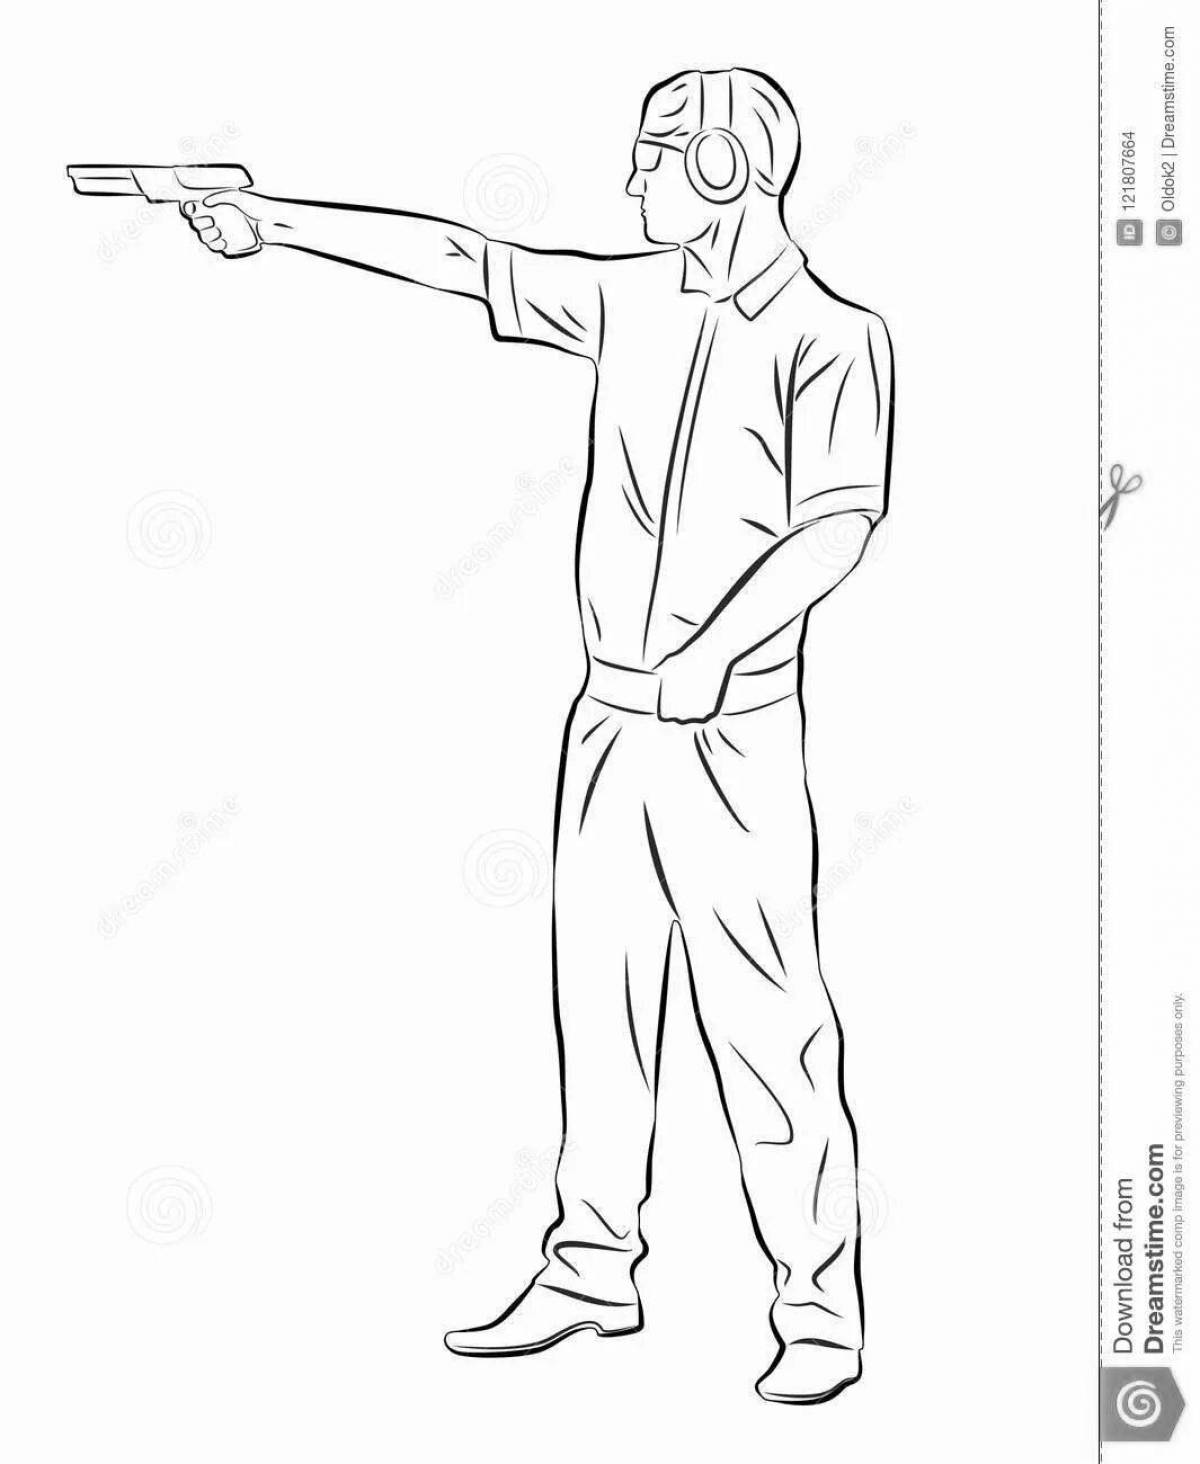 The man with the gun calmly coloring the page